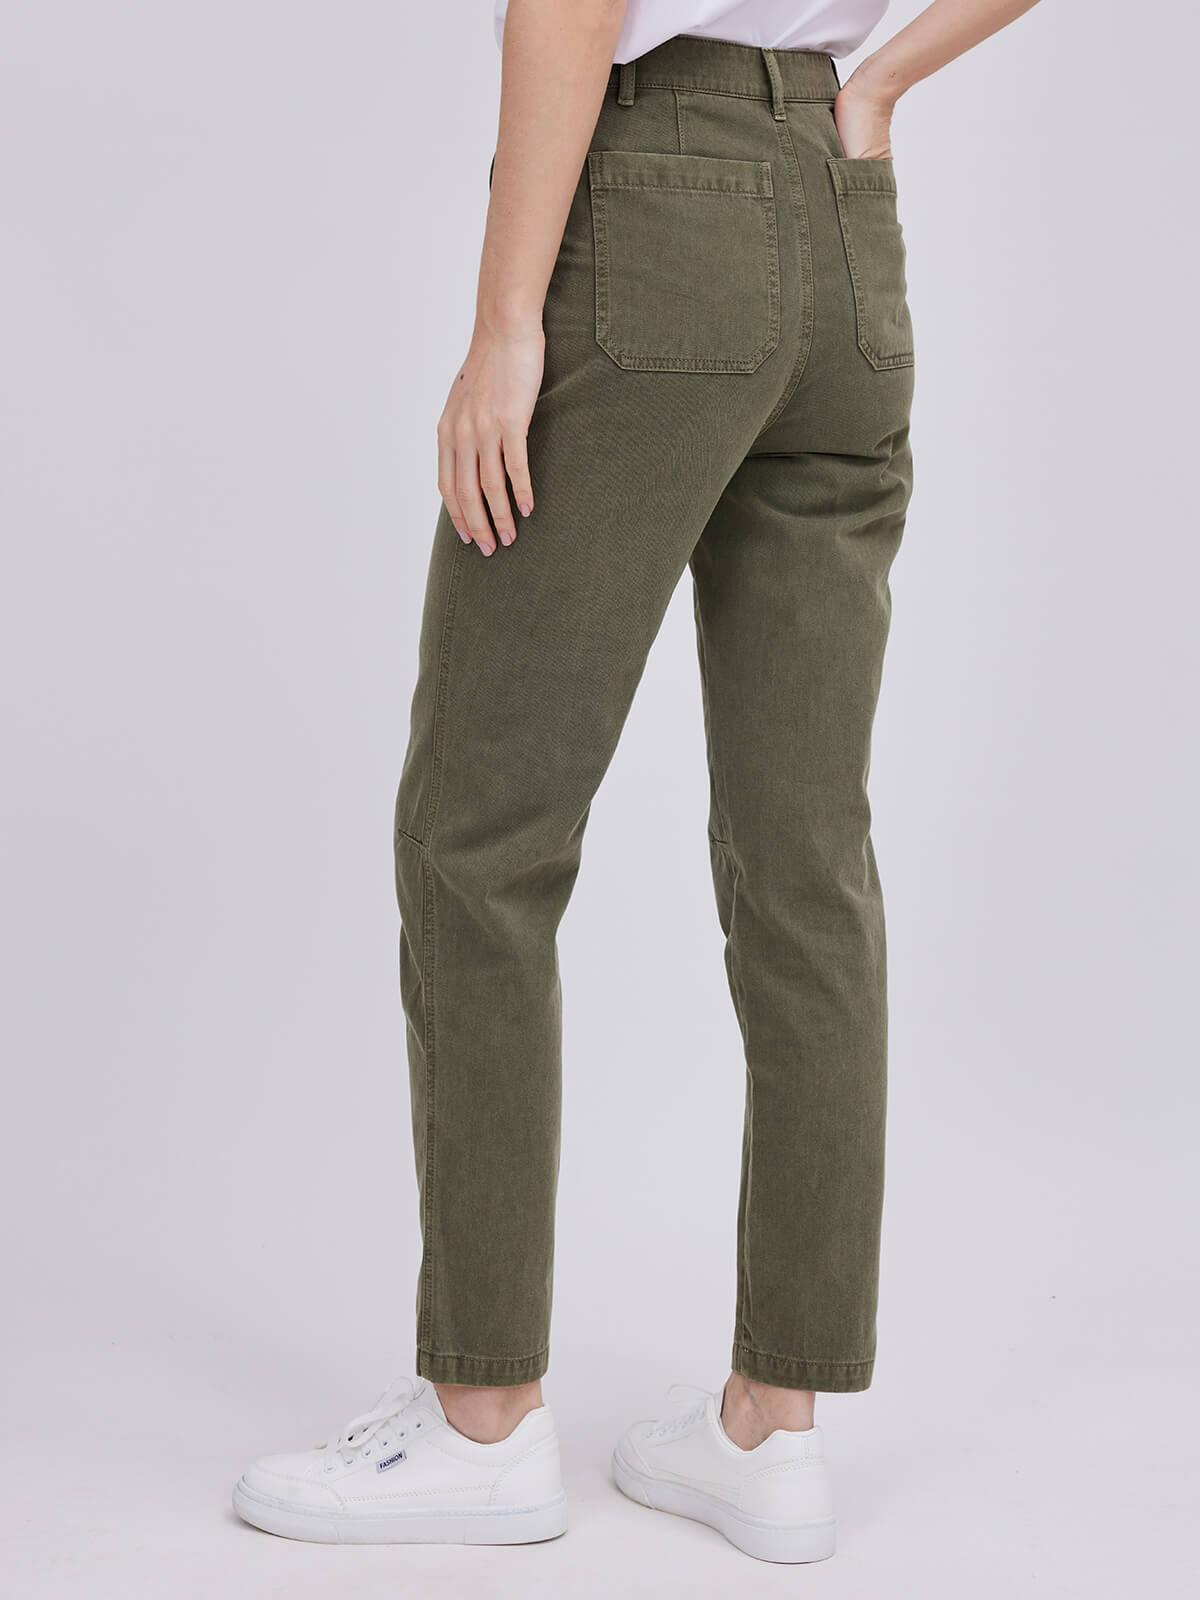 Woven Fabric Cargo Tapered Pants